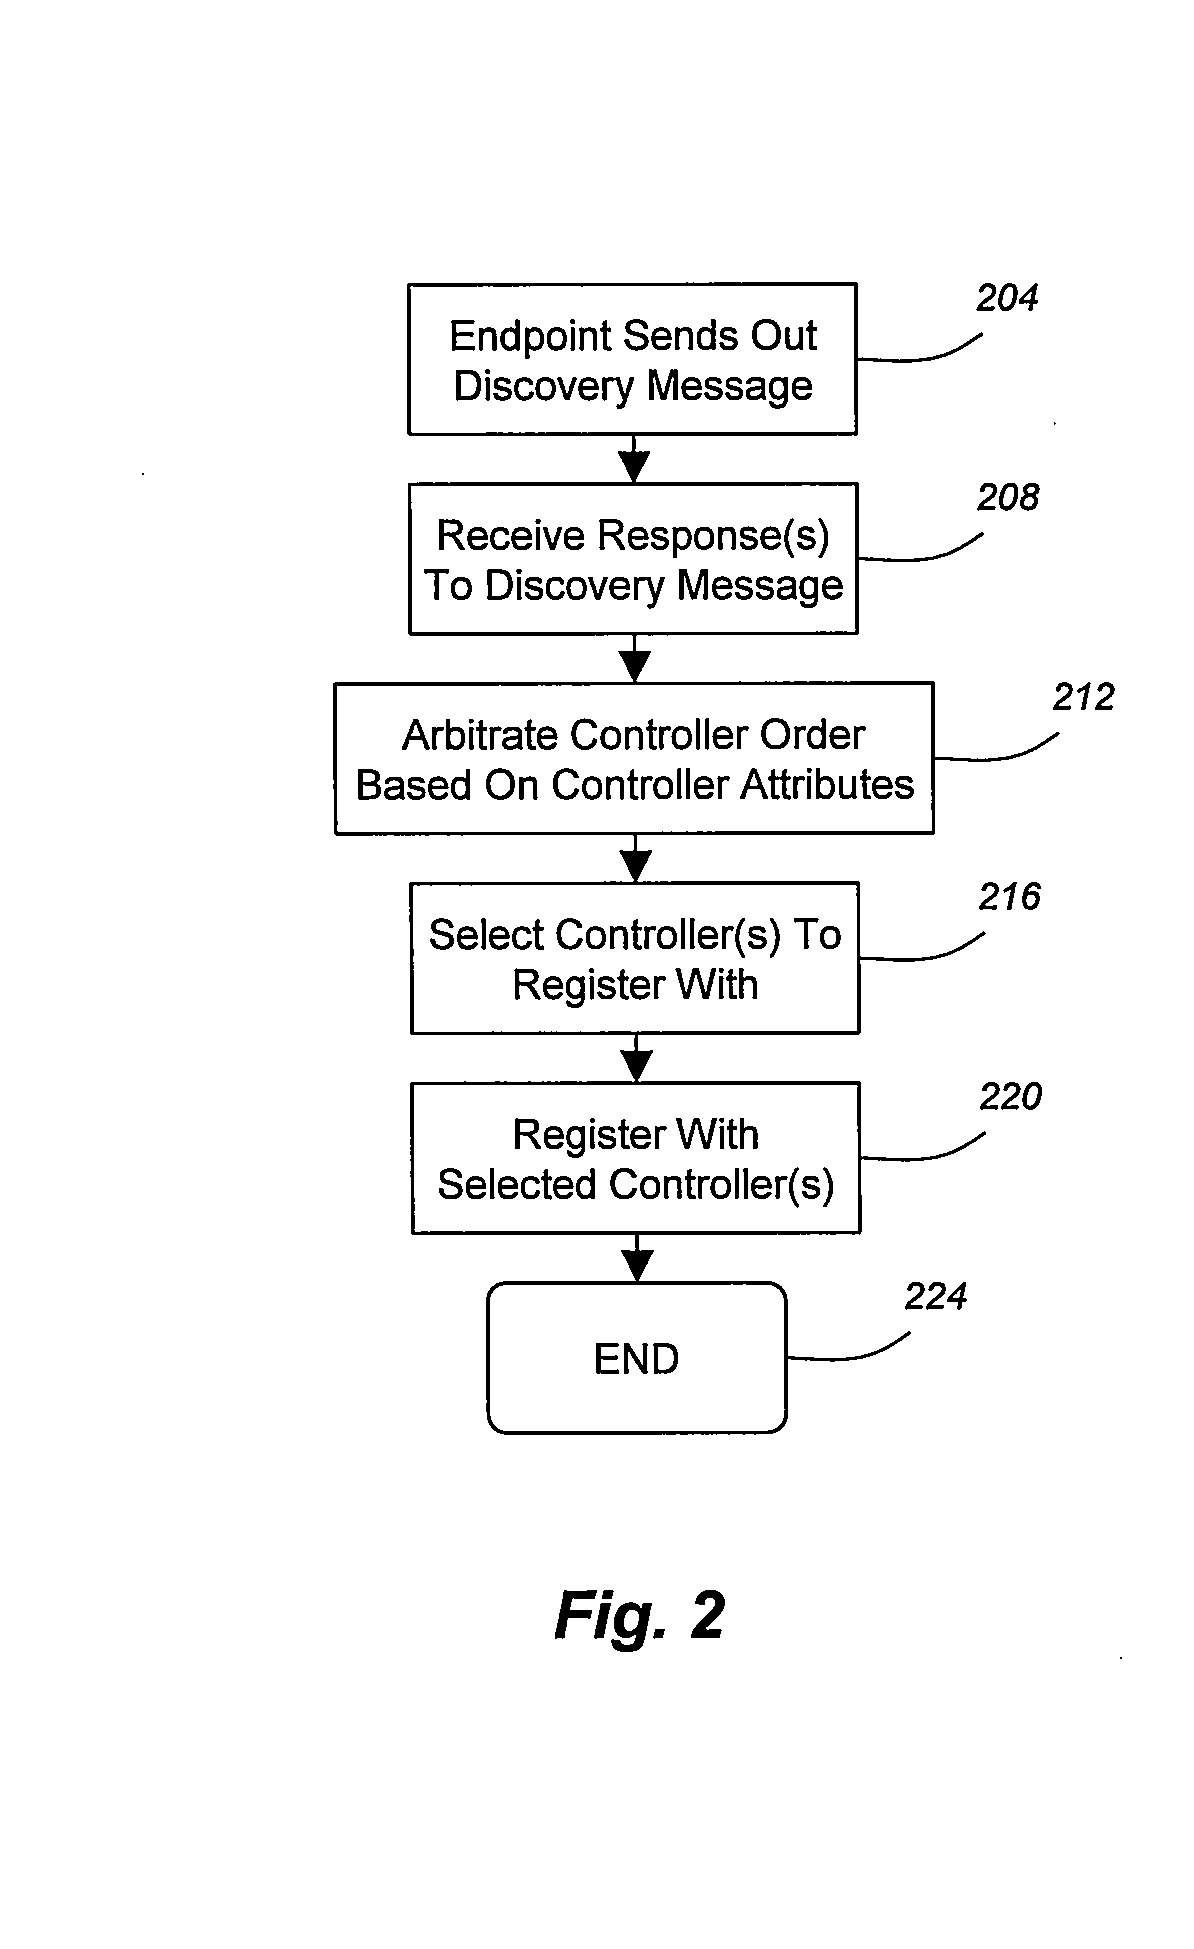 Survivable phone behavior using sip signaling in a sip network configuration